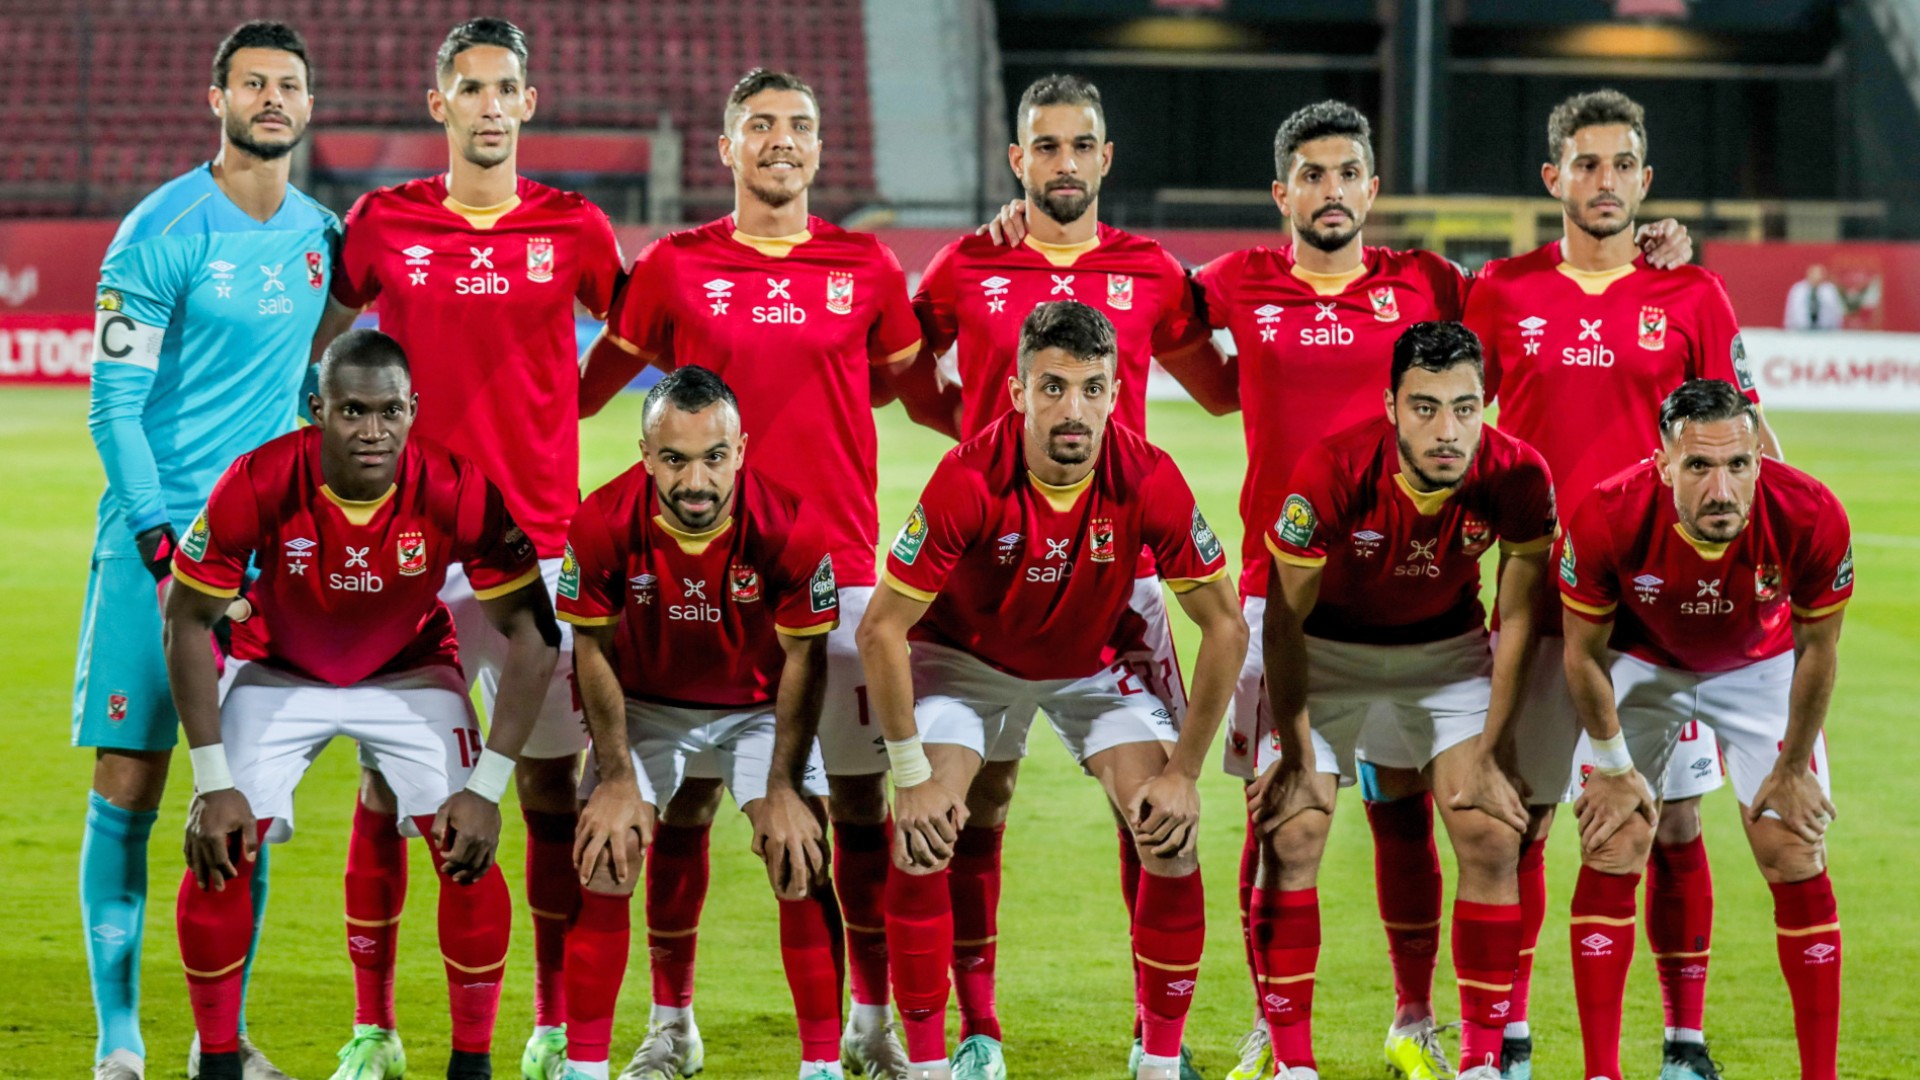 Al Ahly XI to face Kaizer Chiefs – Mosimane starts El Shenawy, Dieng out